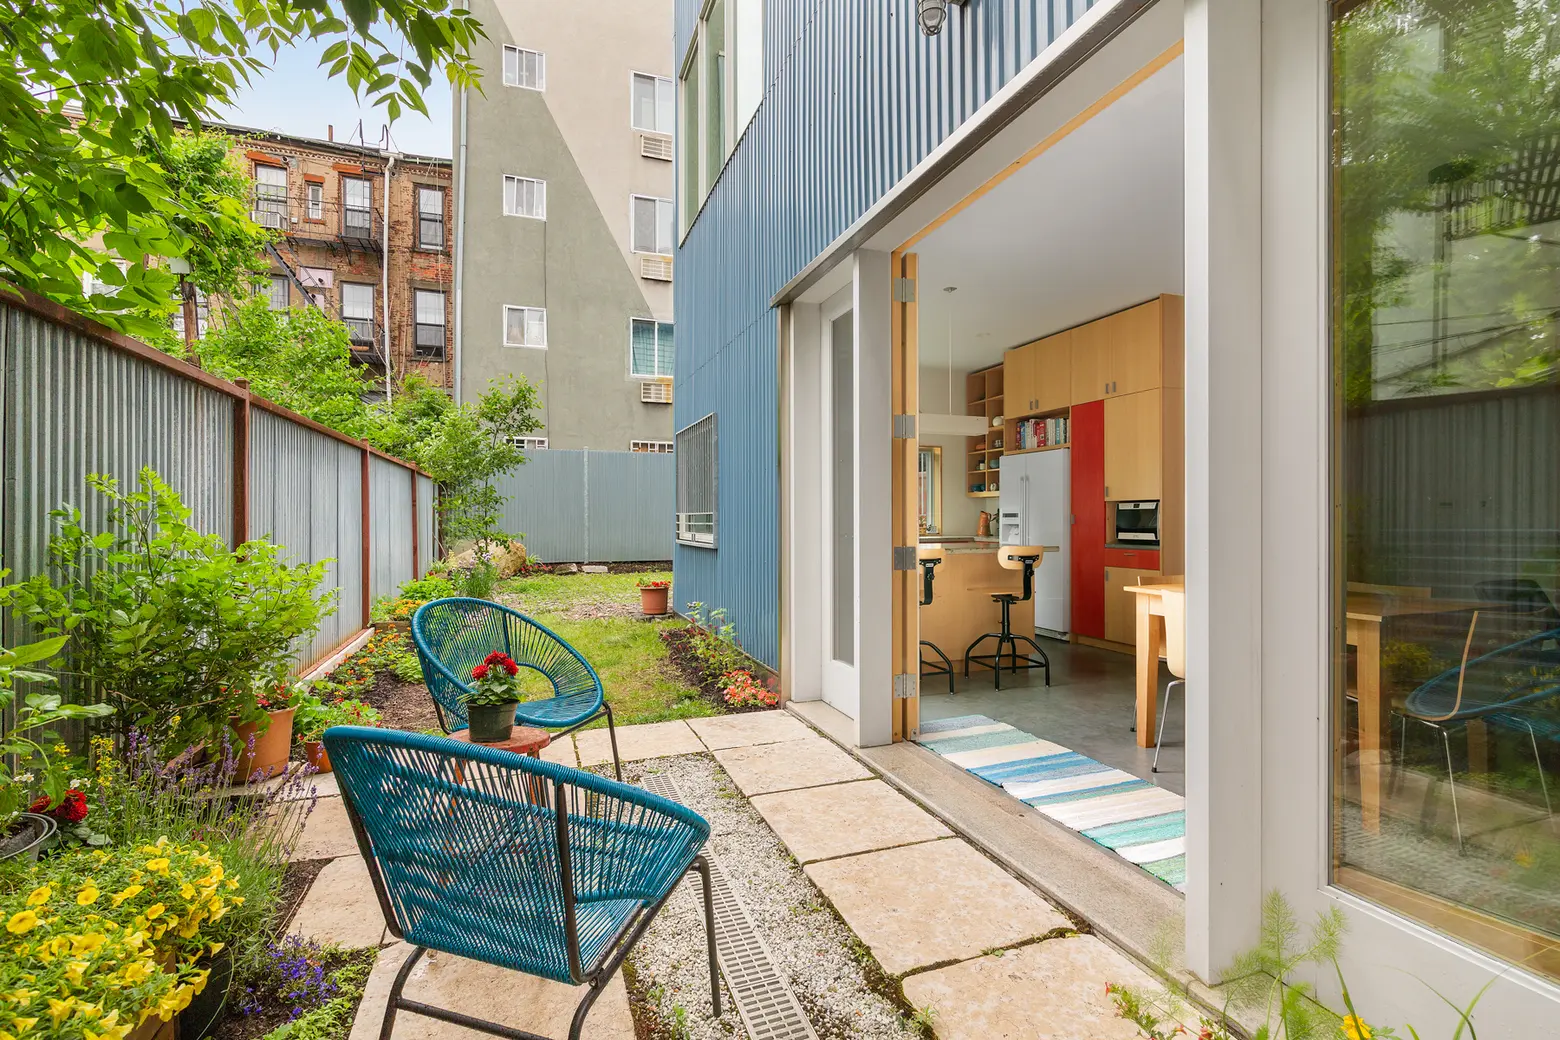 $2.2M Wallabout townhouse comes with multiple outdoor spaces and two parking spots